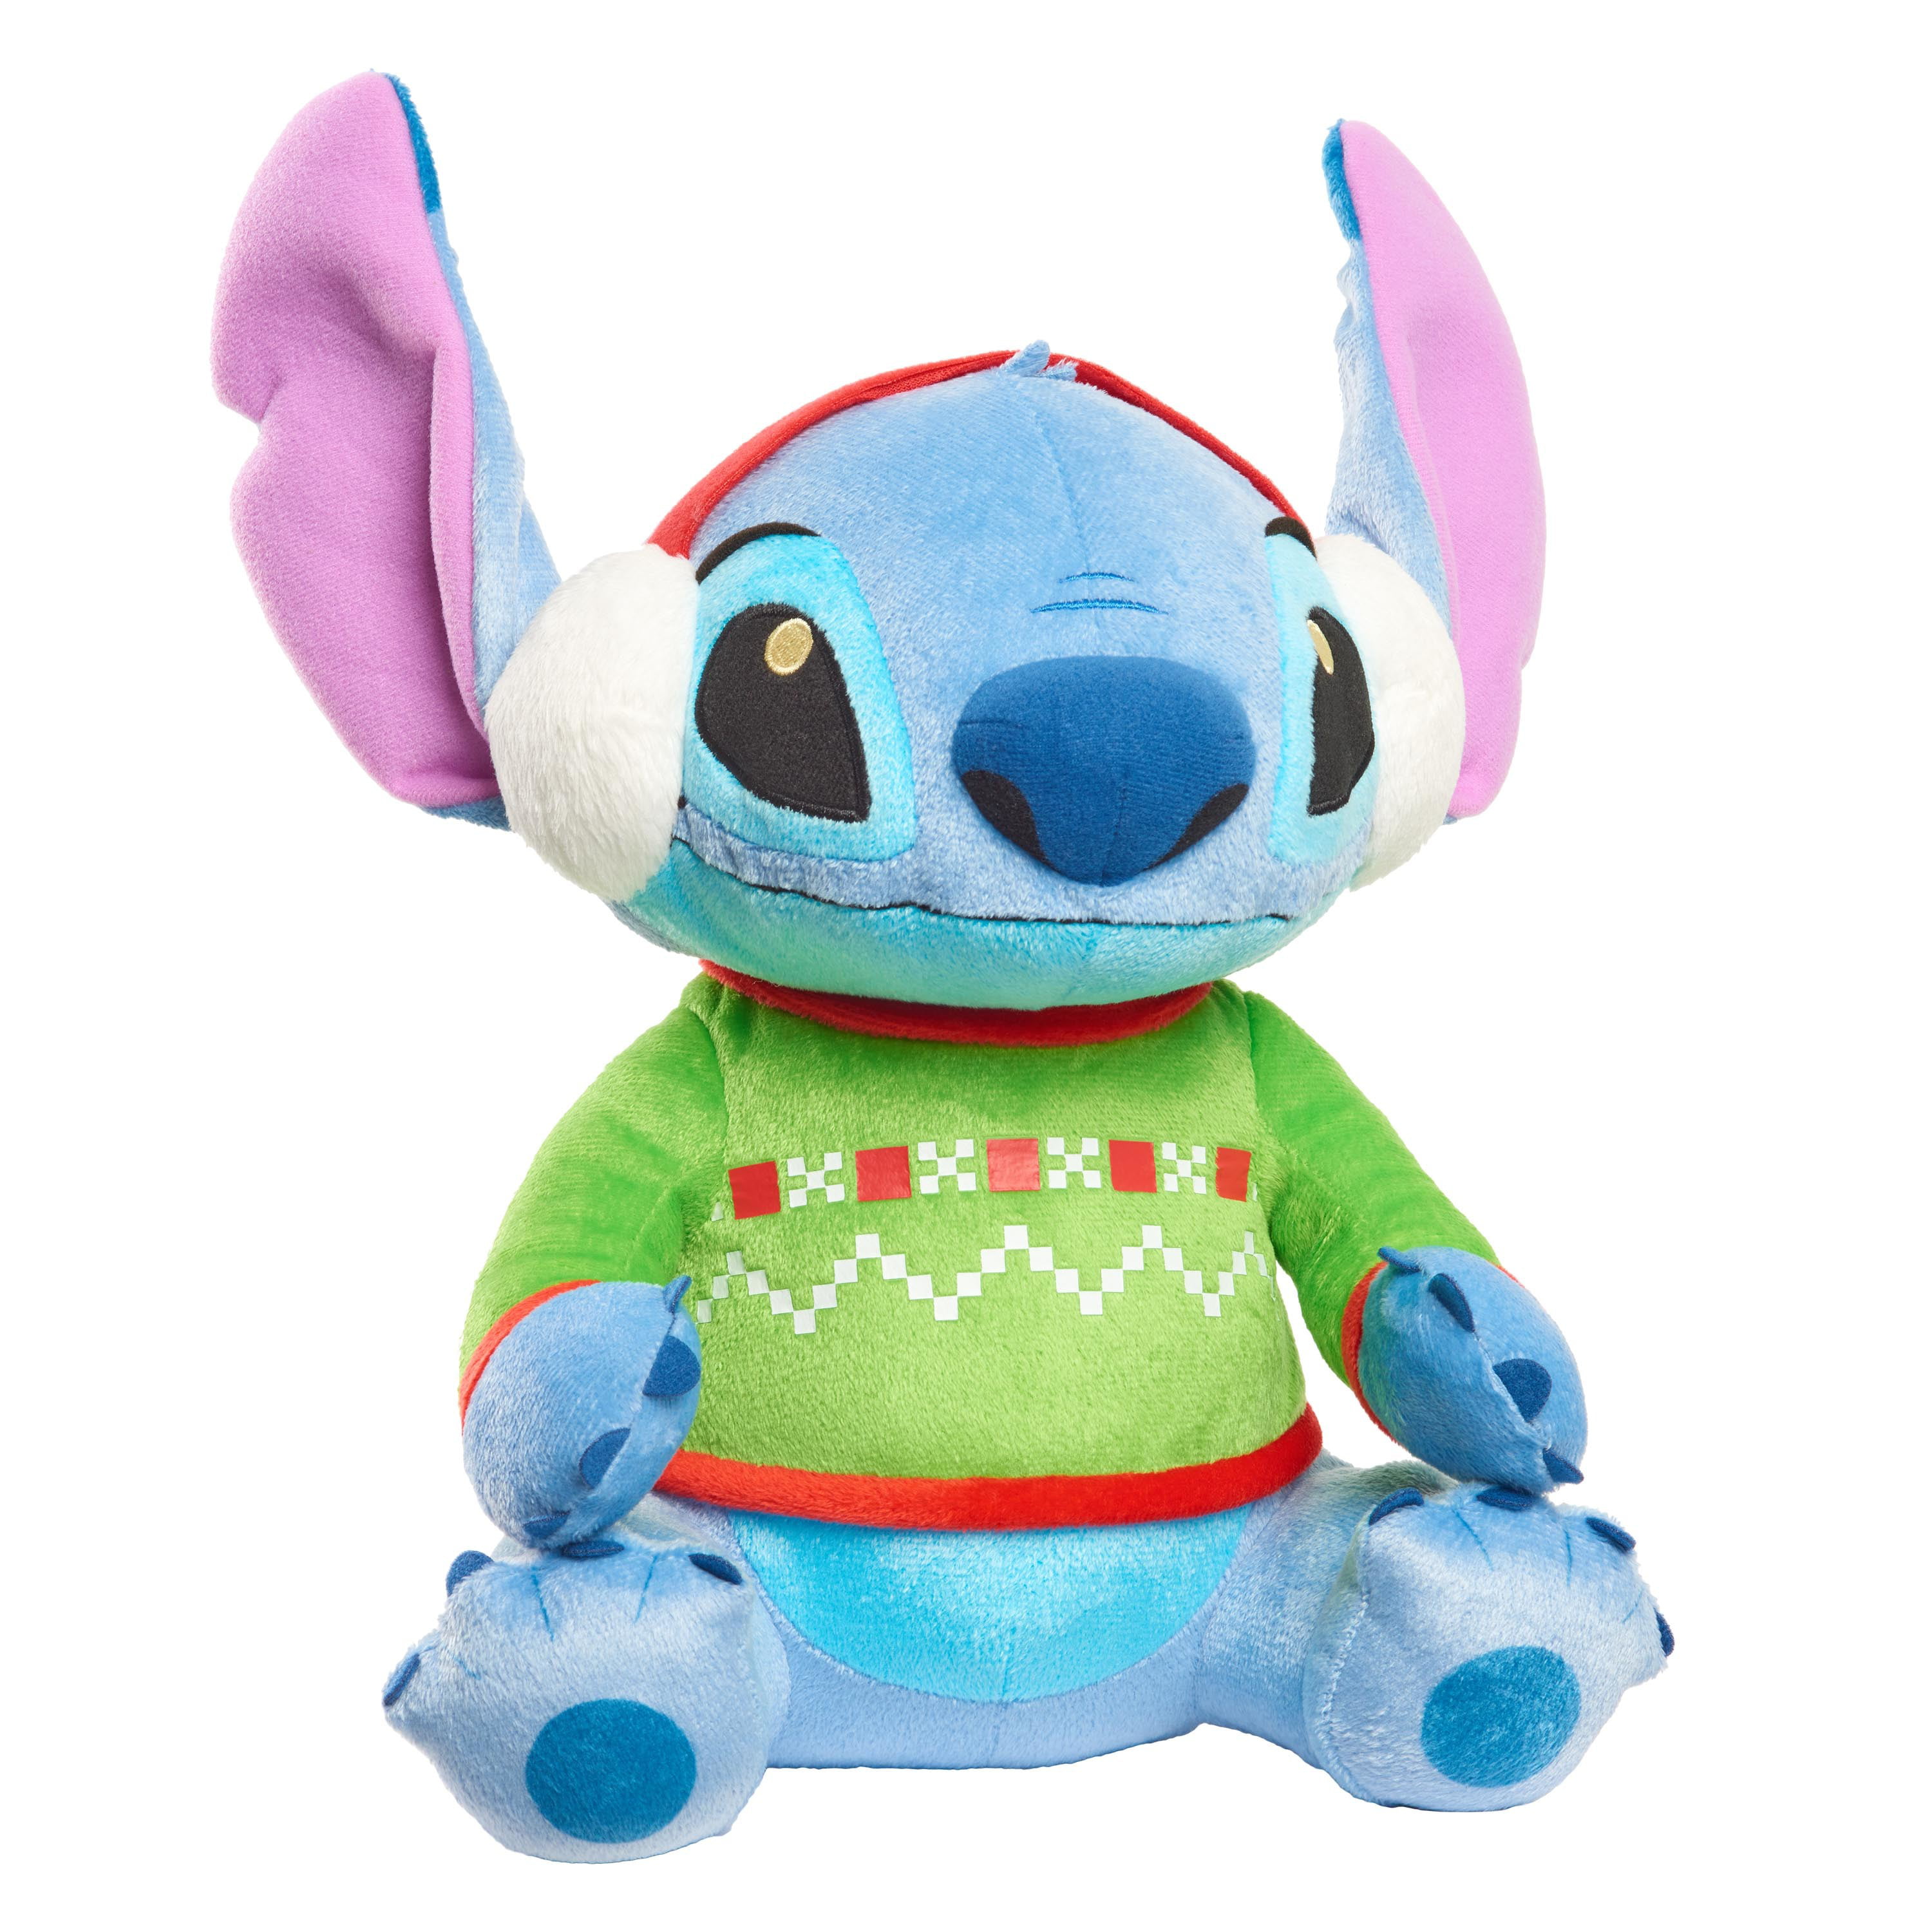 Disney Classics 23-inch Jumbo Plush with Lil Friend, Stuffed Animal, Alien,  Officially Licensed Kids Toys for Ages 2 Up,  Exclusive